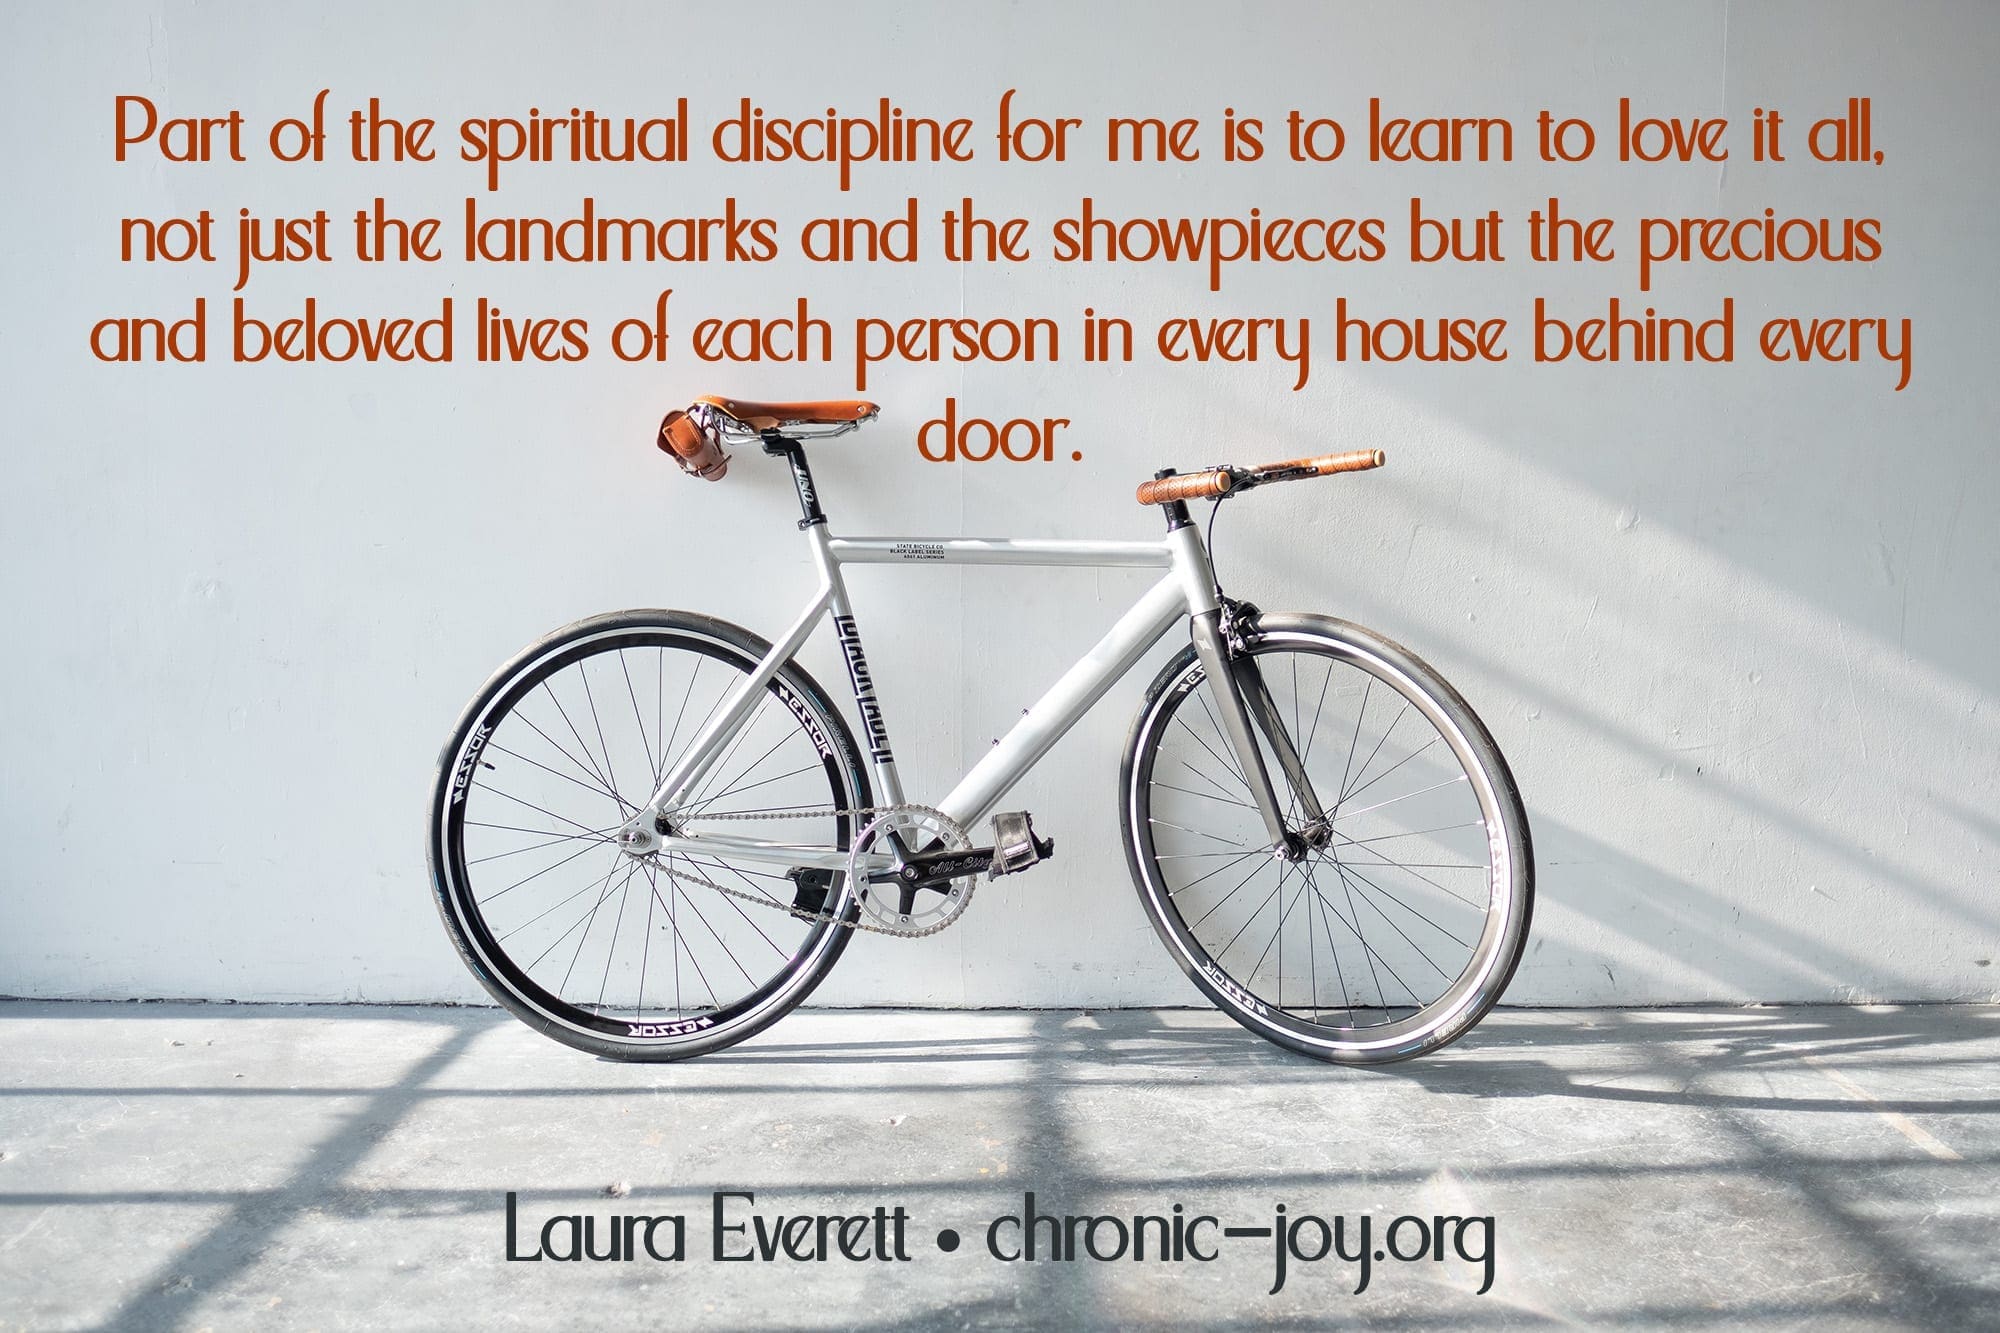 "Part of the spiritual discipline for me is to learn to love it all, not just the landmarks and the showpieces but the precious and beloved lives of each person in every house behind every door." Laura Everett